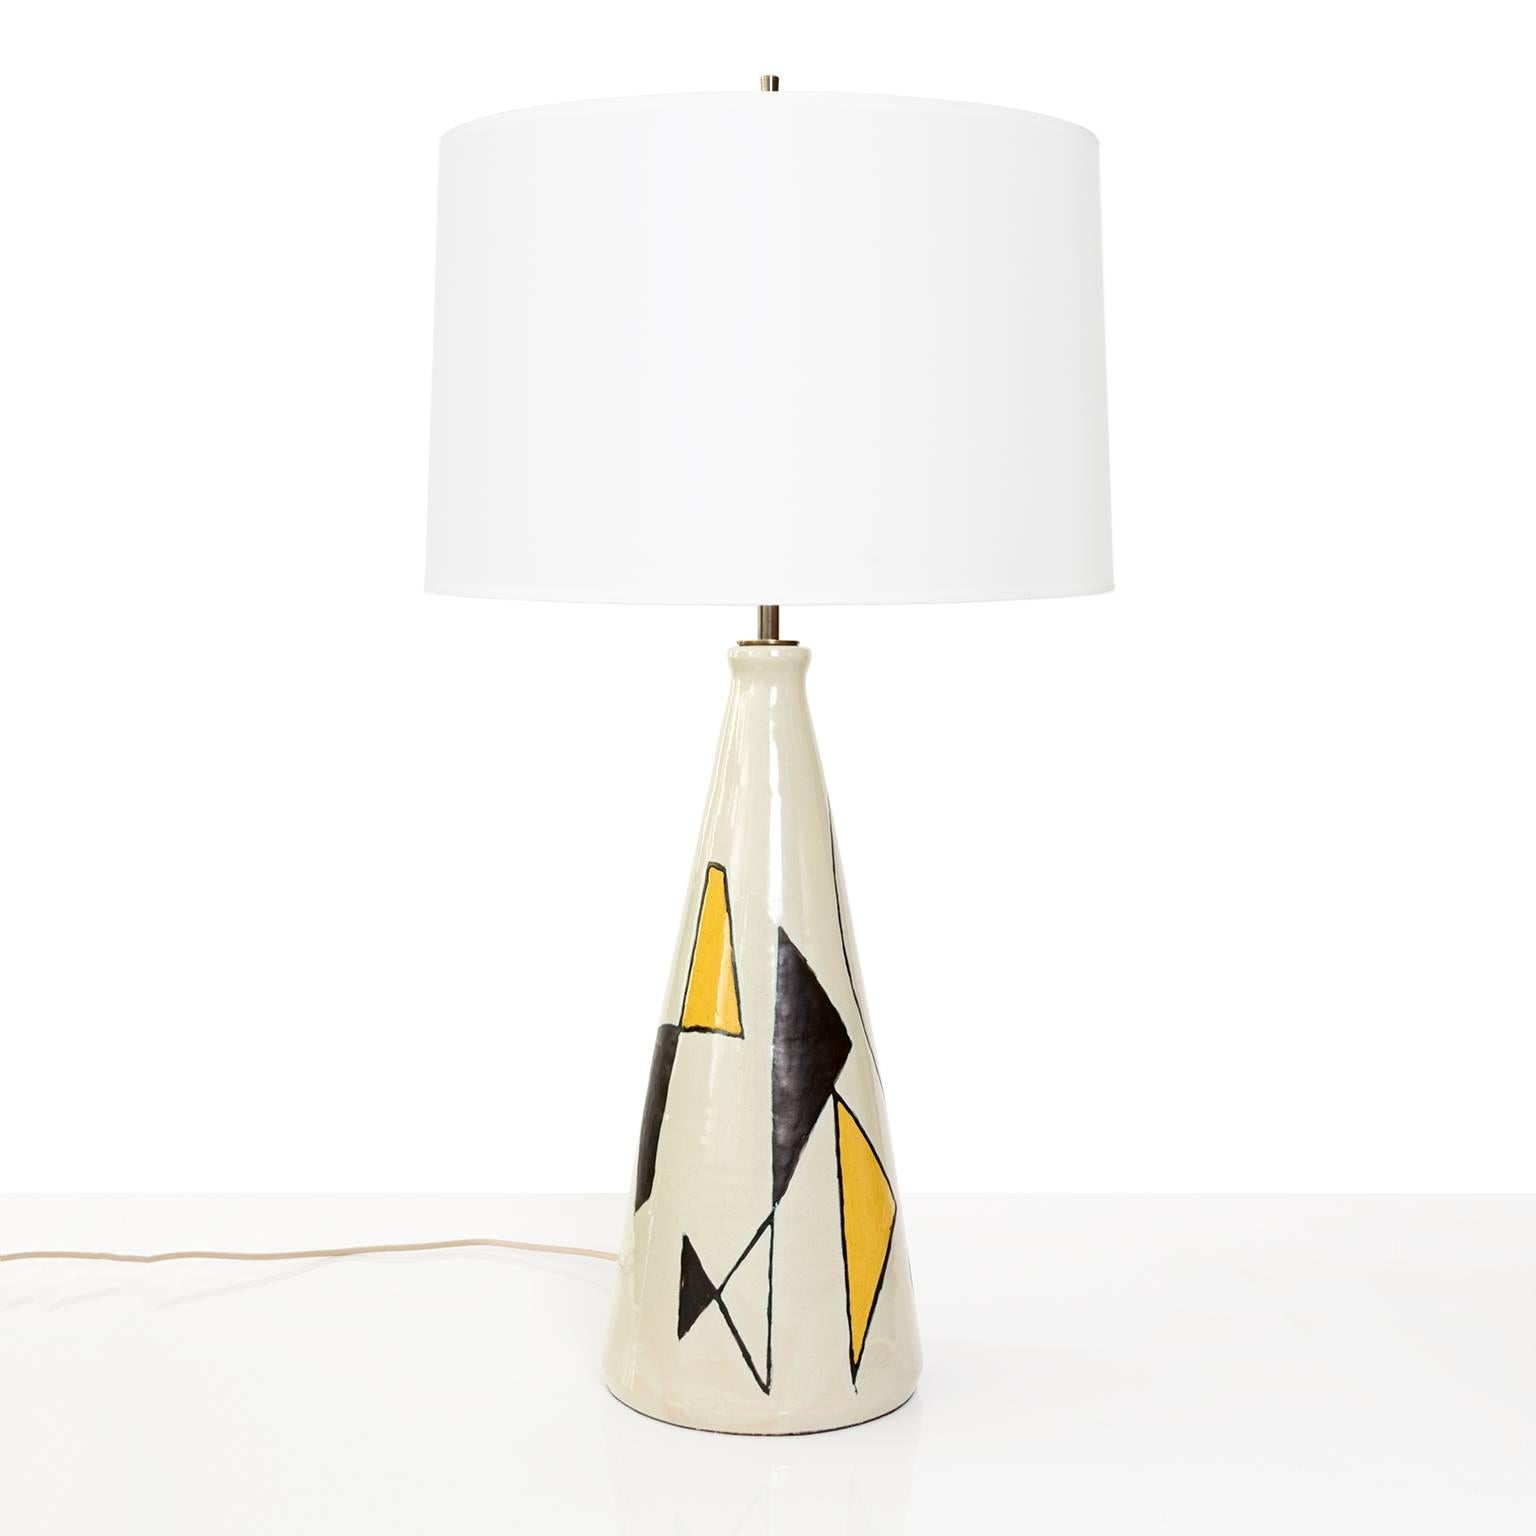 Scandinavian Mid-Century glazed stoneware table lamp by axel bruel, denmark. The lamp is decorated by bruel in abstract shapes. Newly rewired with a patinated brass double cluster of edison base sockets. Finial is adjustable.
Shade not includes
